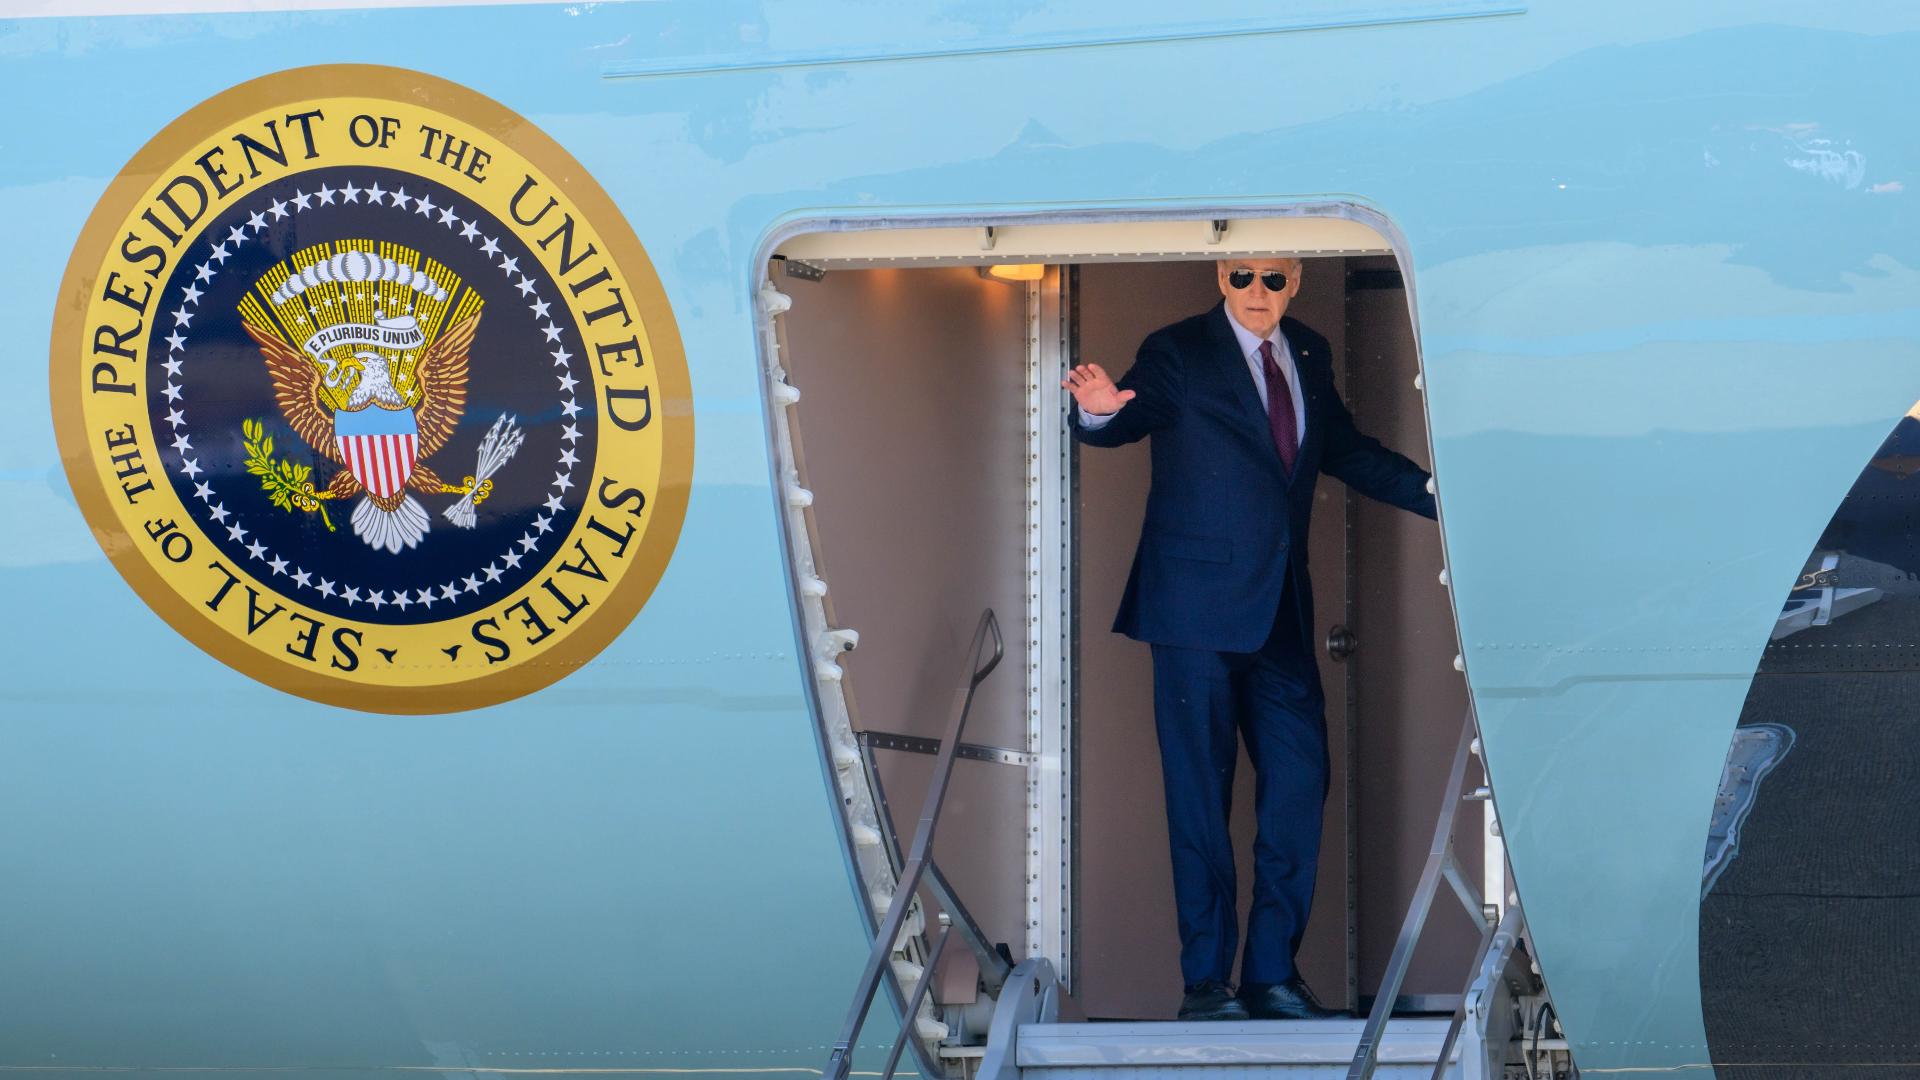 Biden departed from the Emerald City on Saturday afternoon after attending a campaign event in Medina.